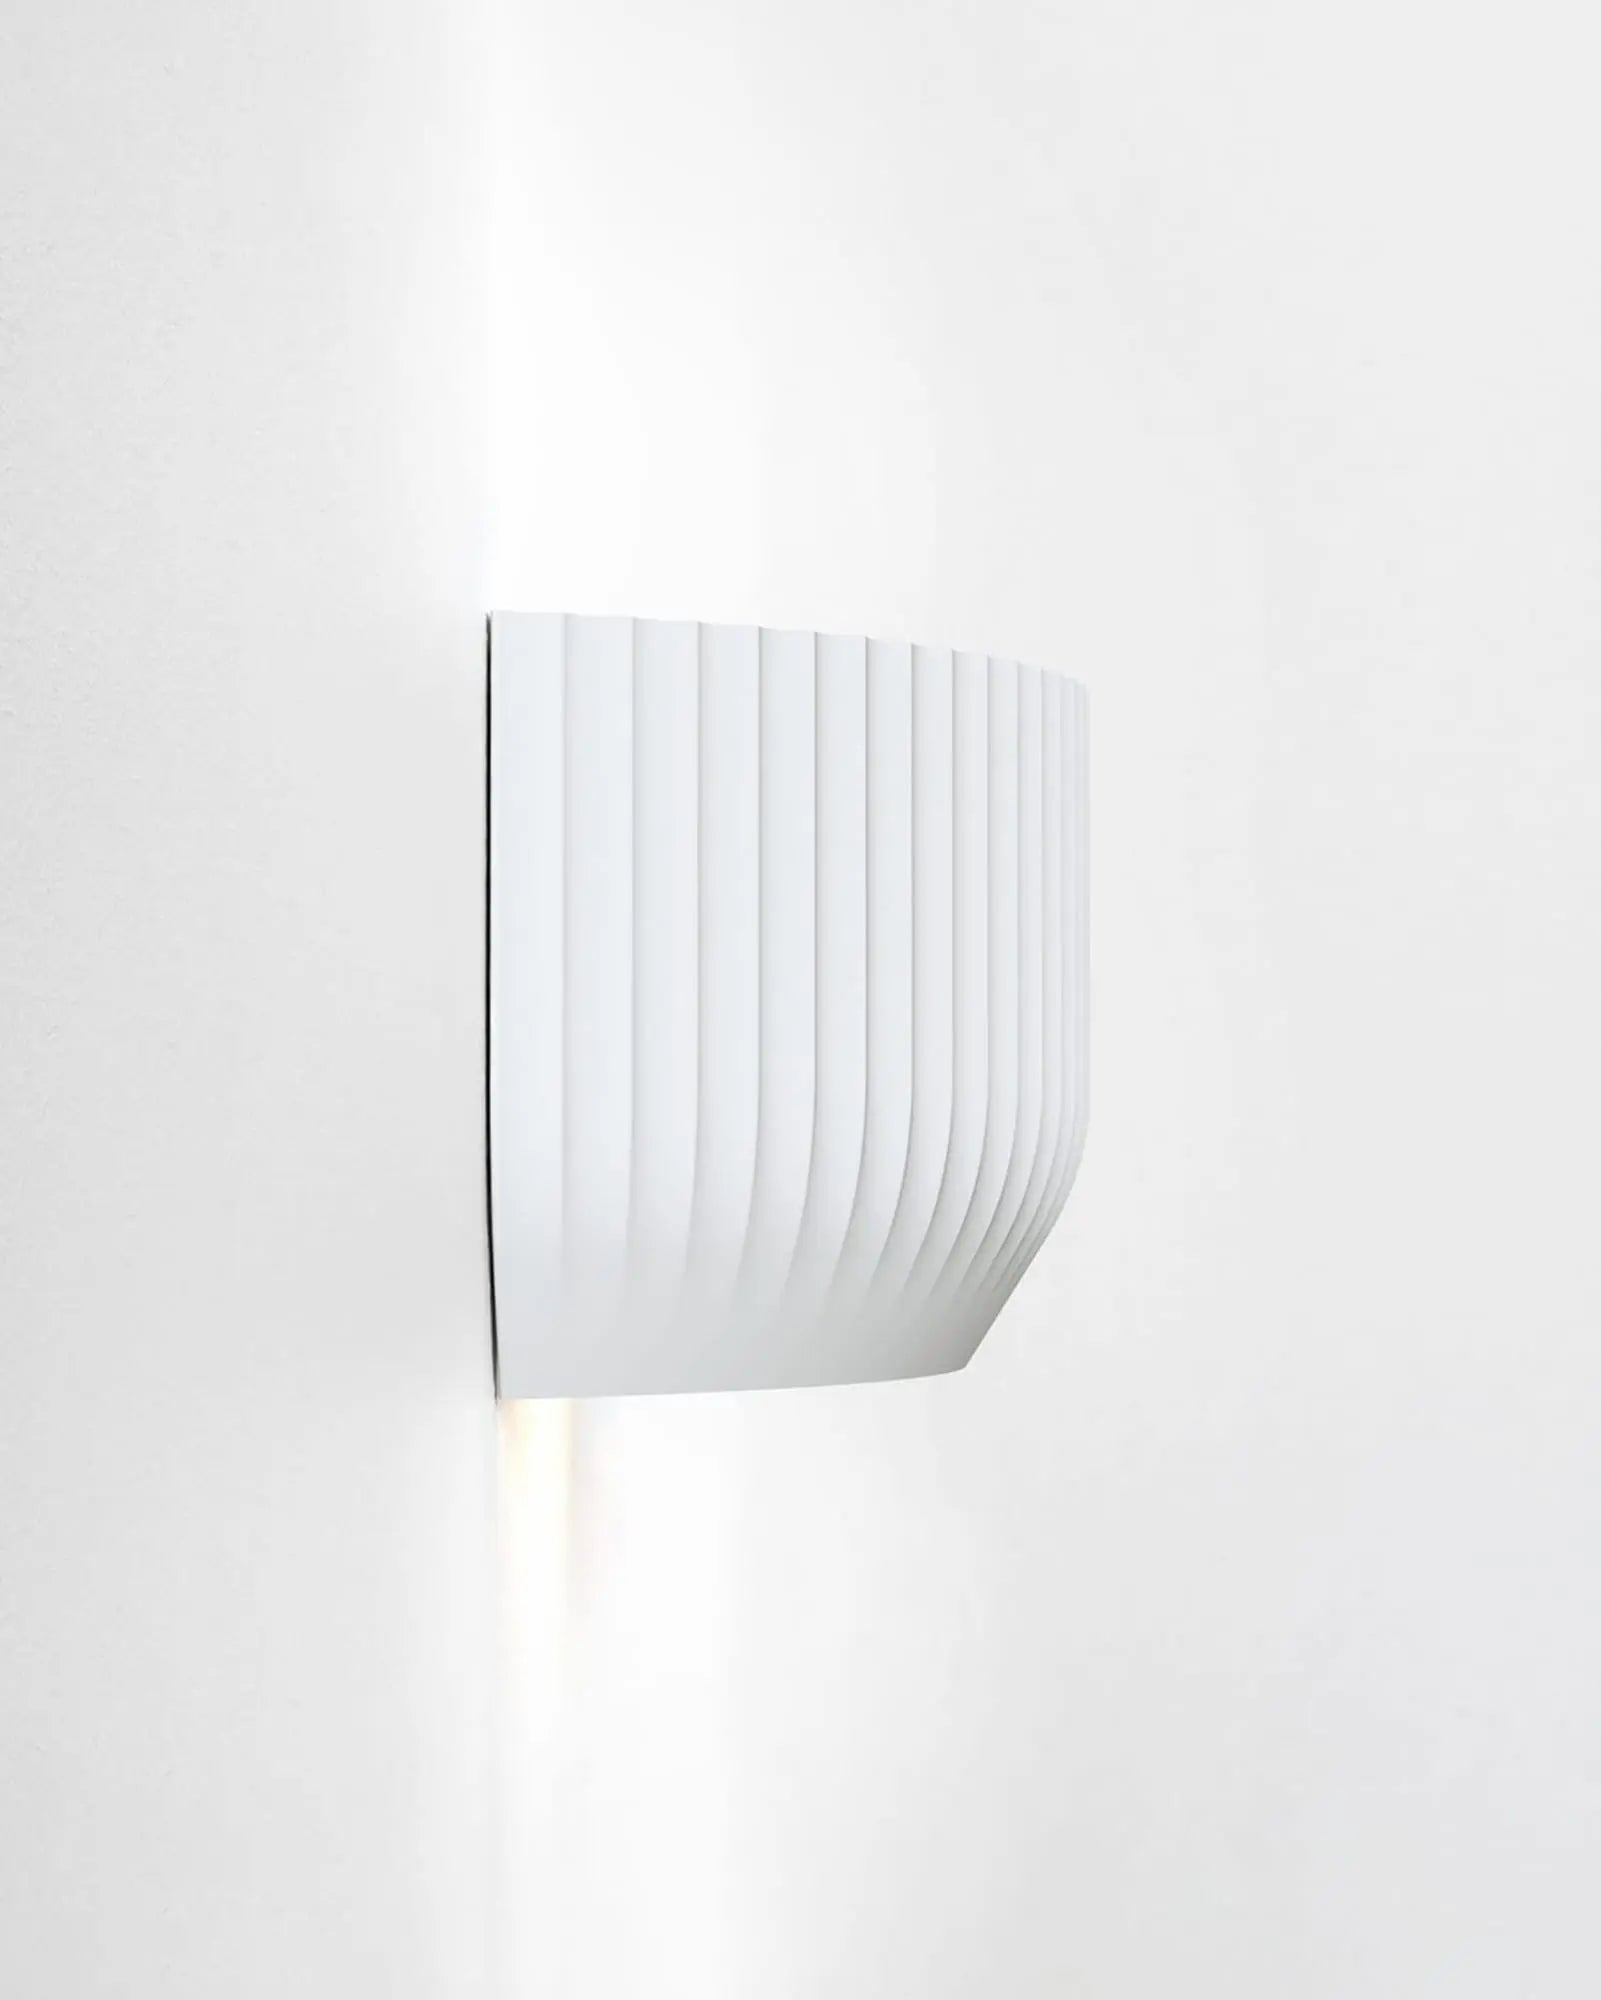 Blend plaster contemporary architectural style wall light product photo side